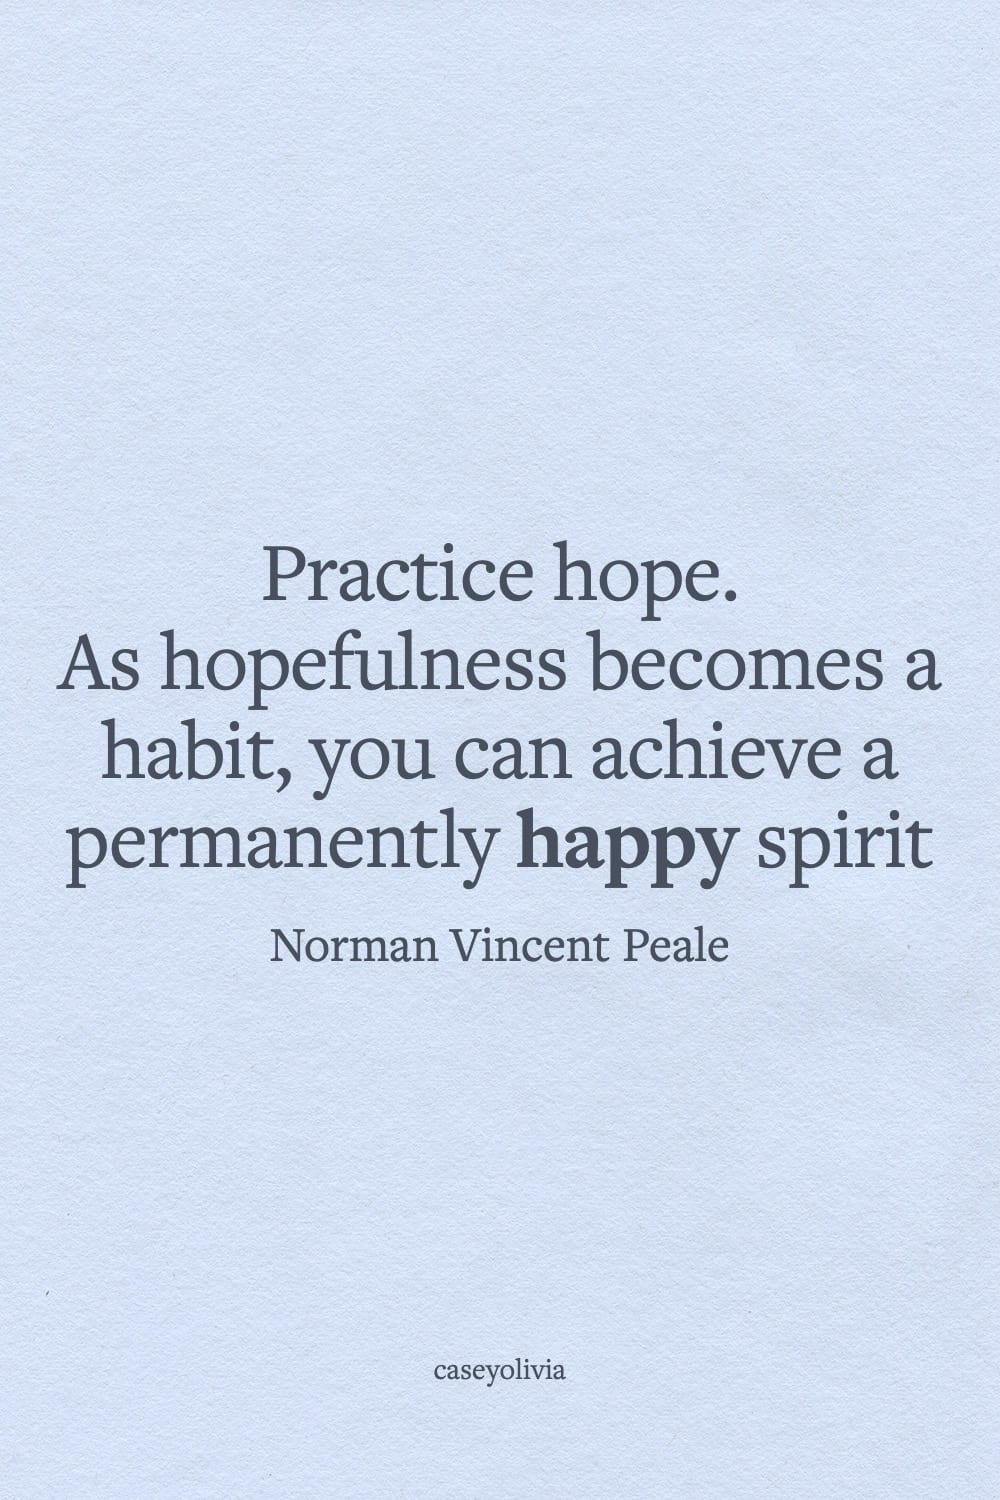 practice hope norman vincent peale quotation about happiness